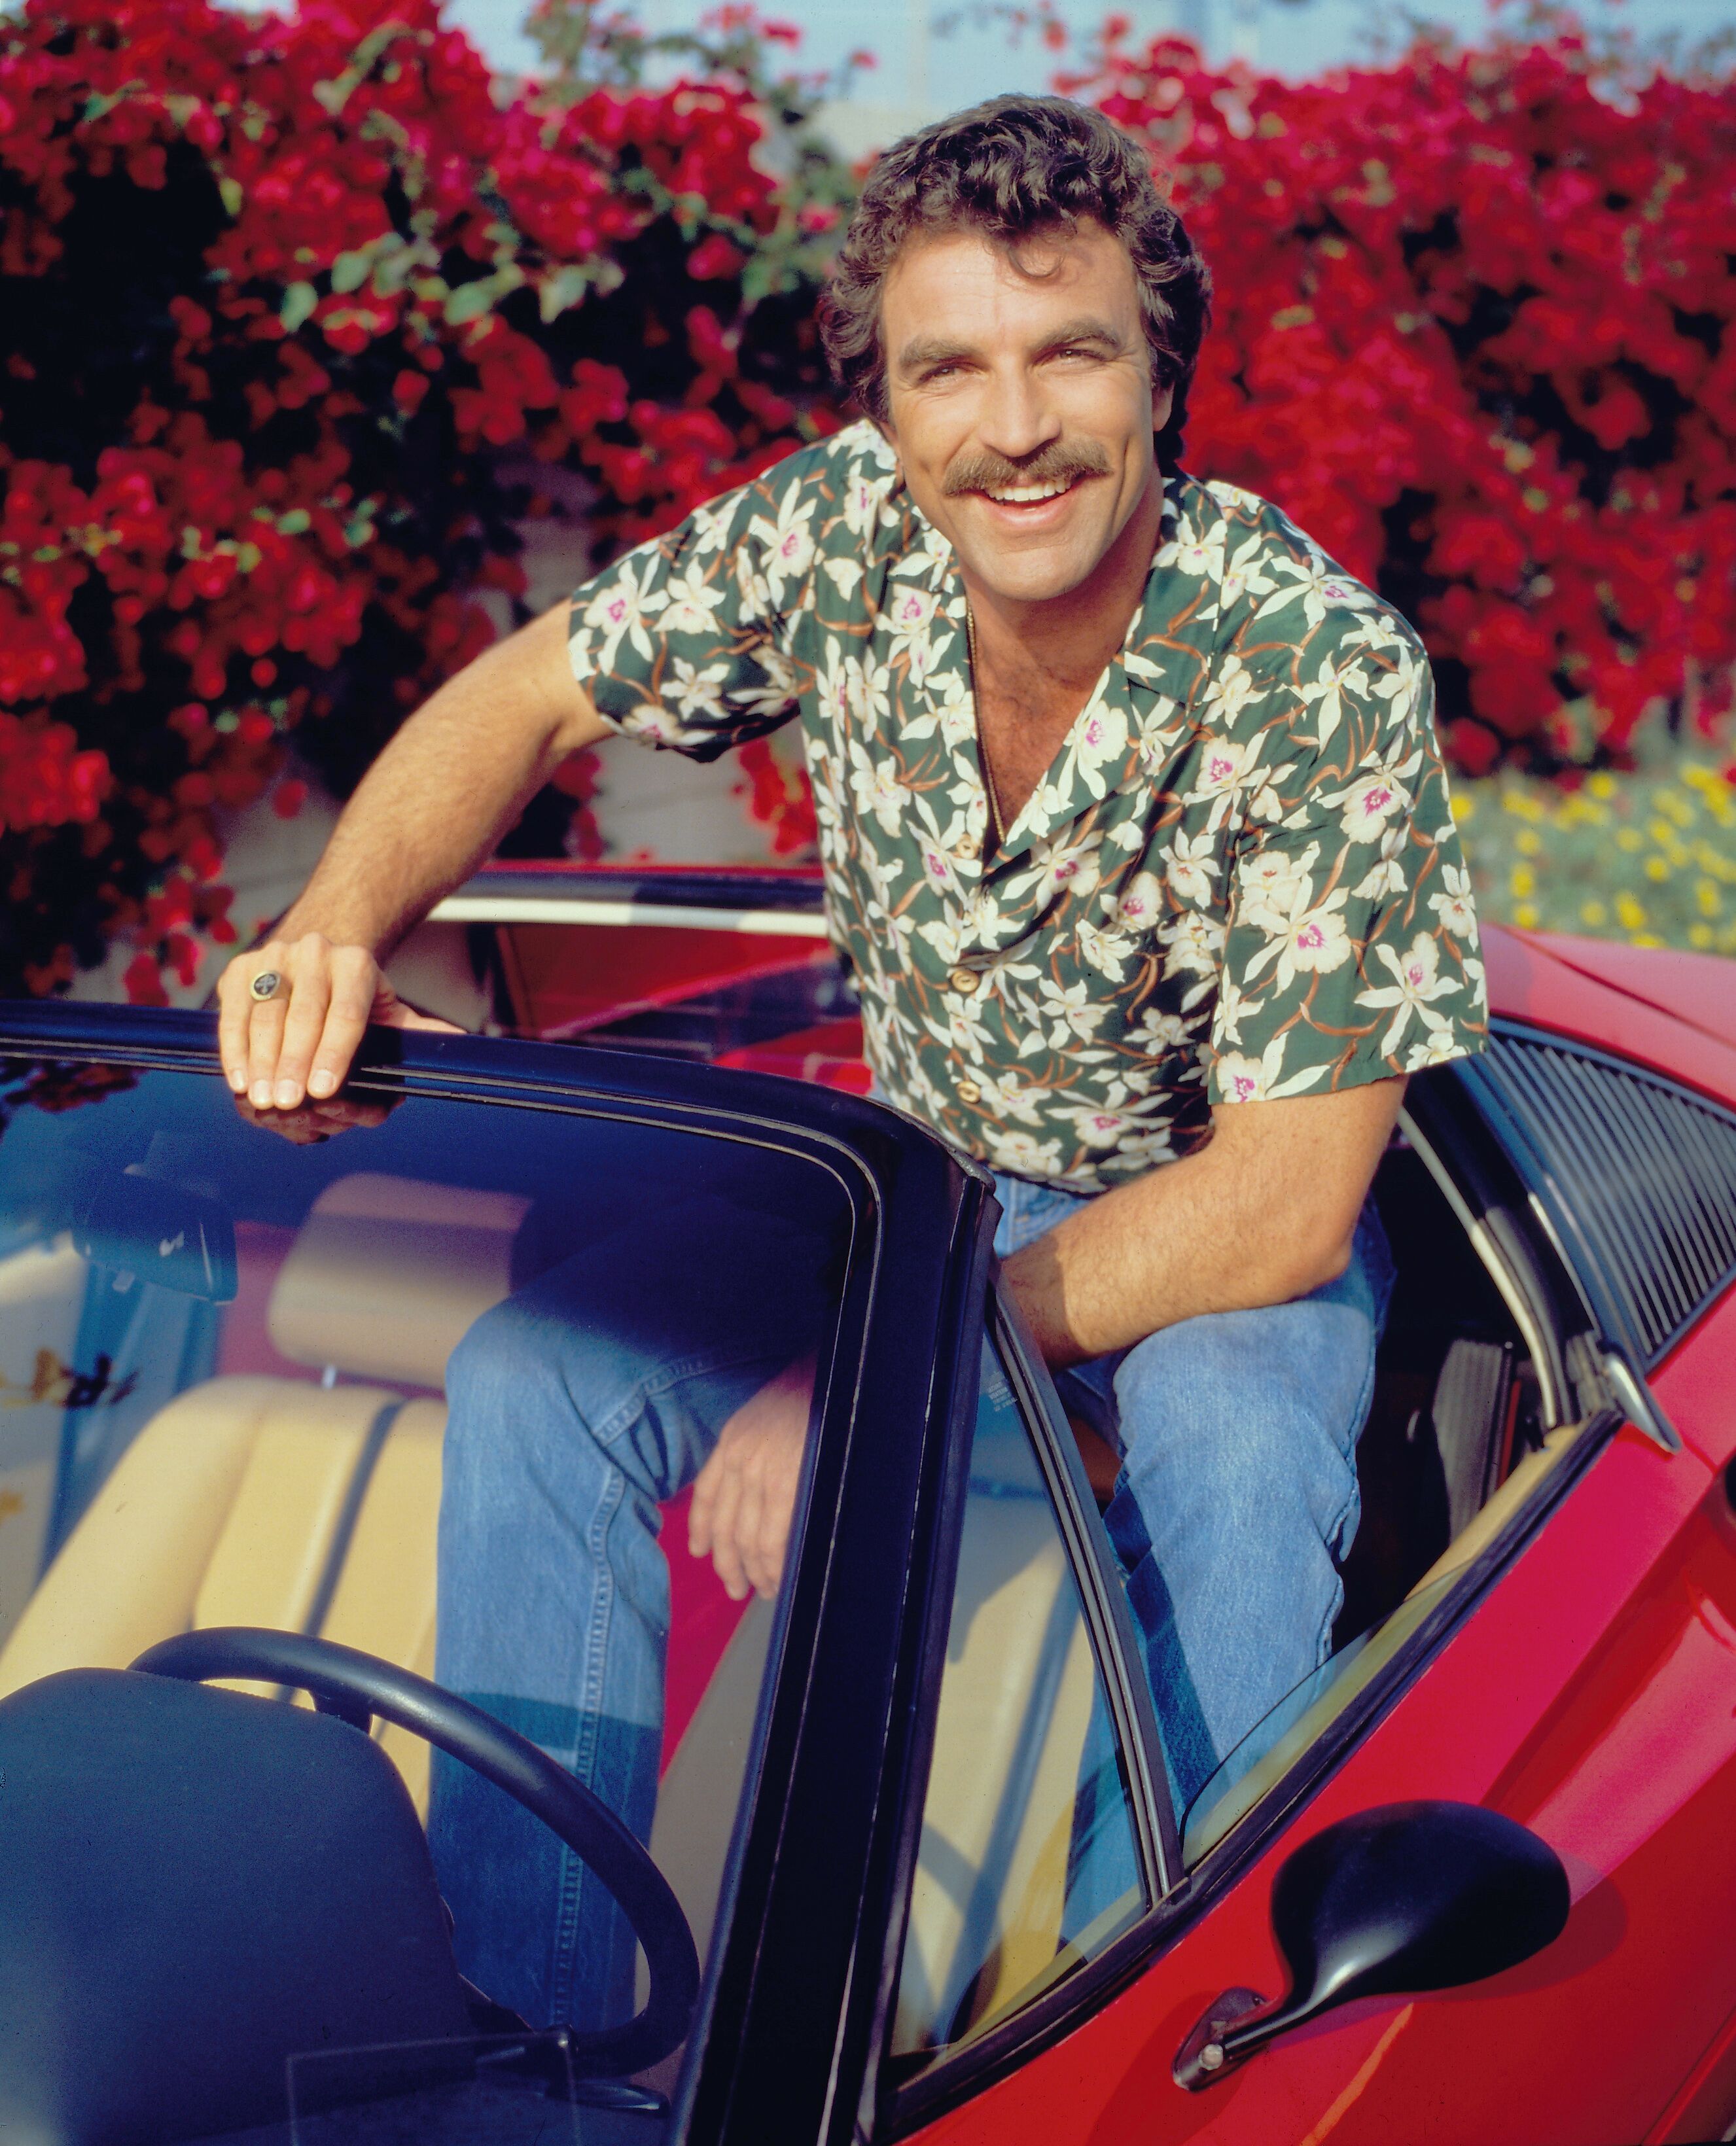 Tom Selleck as Thomas Magnum in "Magnum P.I." circa 1981 | Source: Getty Images